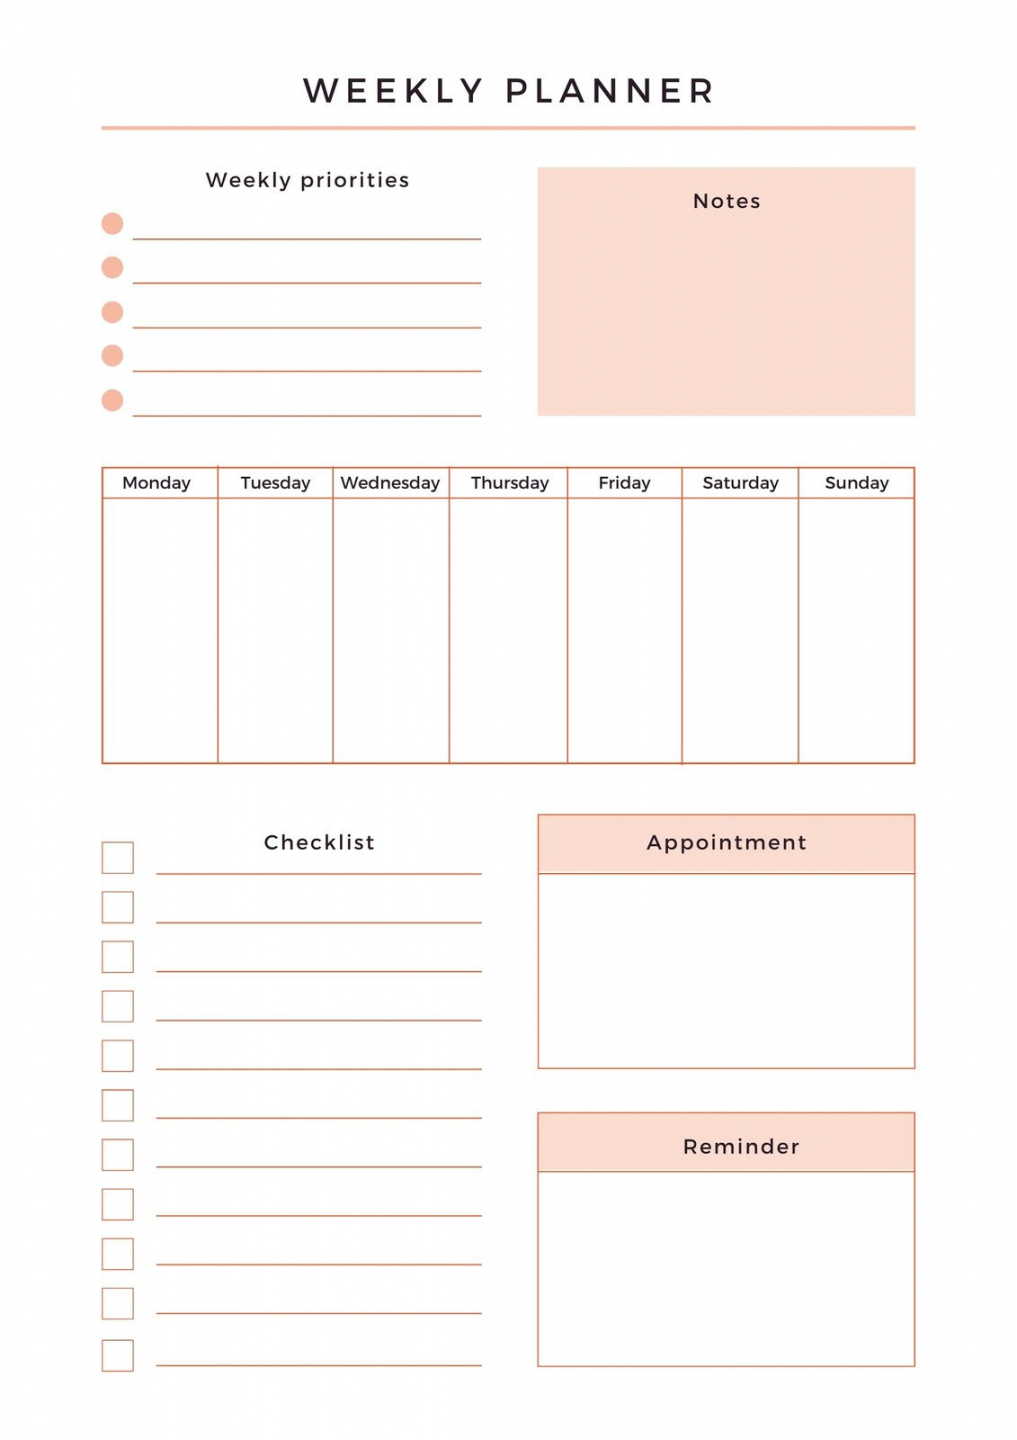 Weekly Planner Free Printable - Printable - Free, printable planner templates to customize  Canva